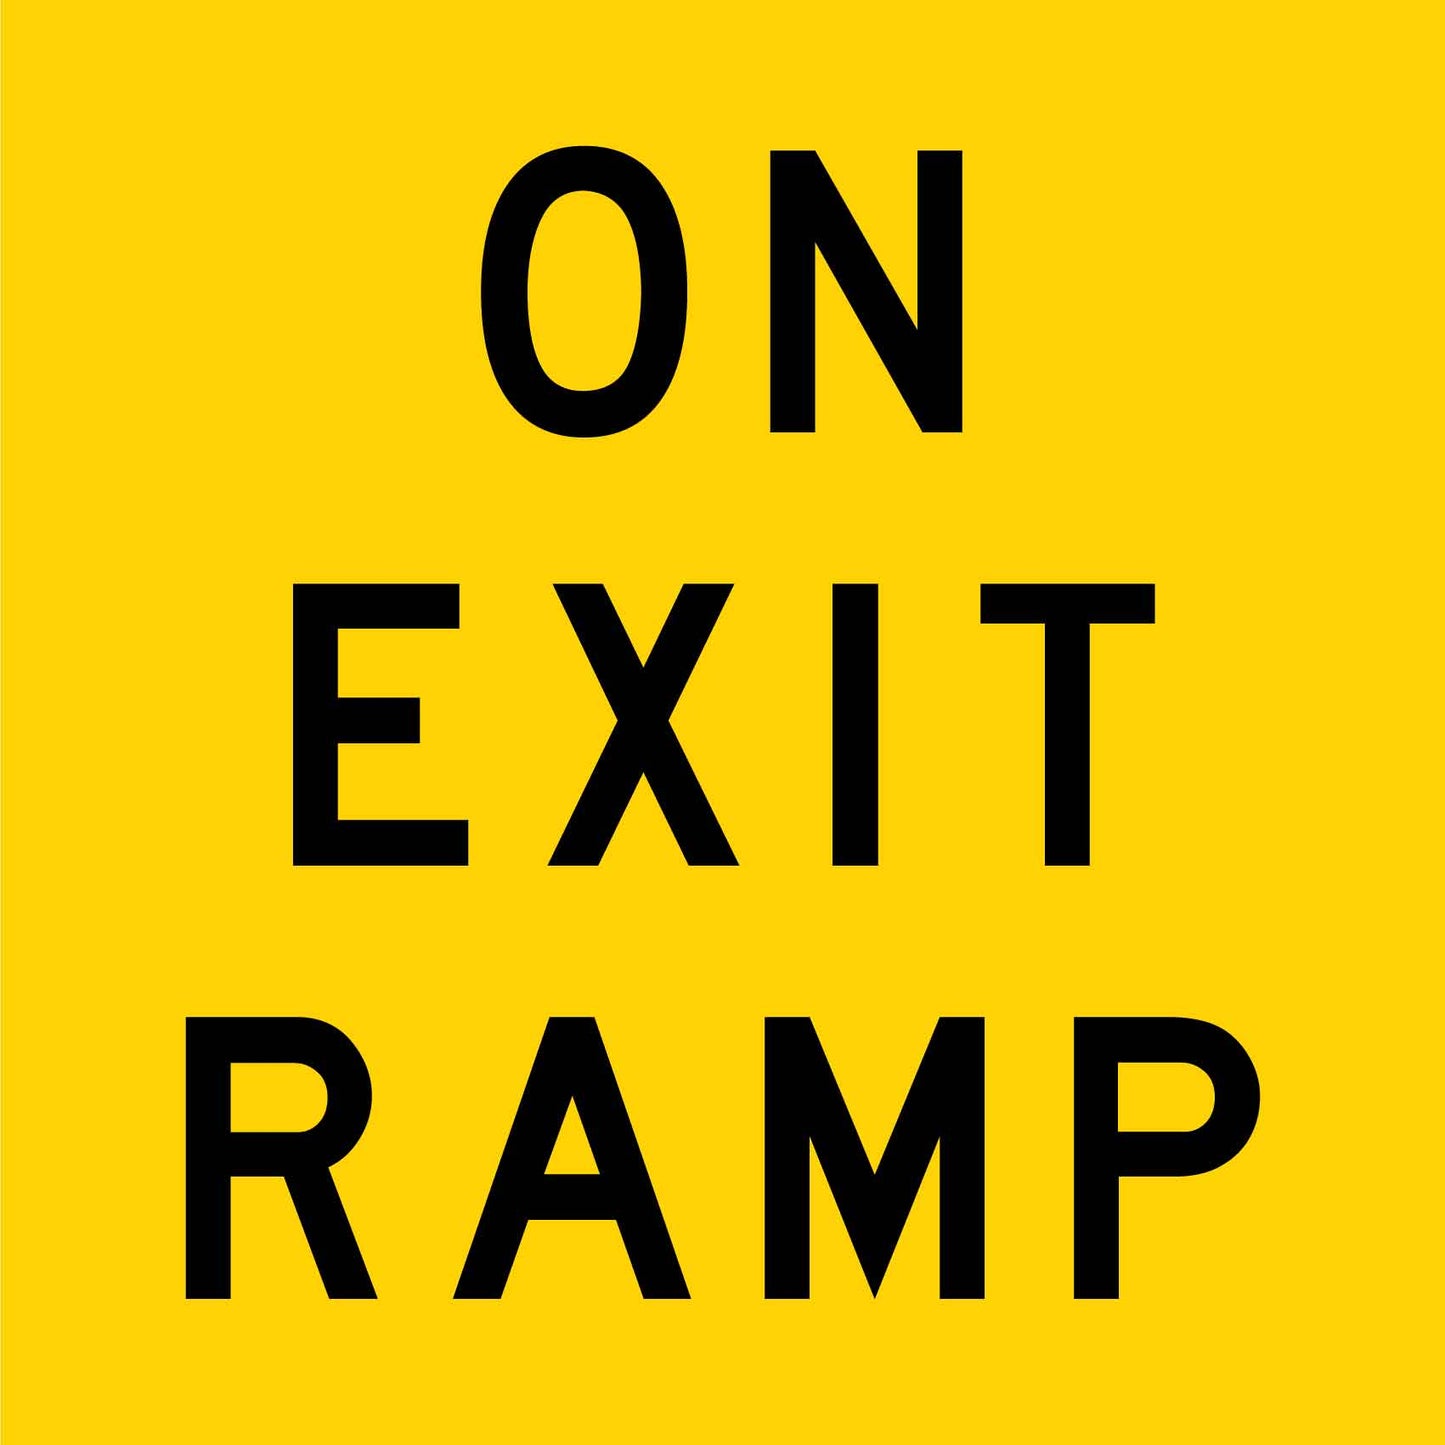 On Exit Ramp Multi Message Reflective Traffic Sign